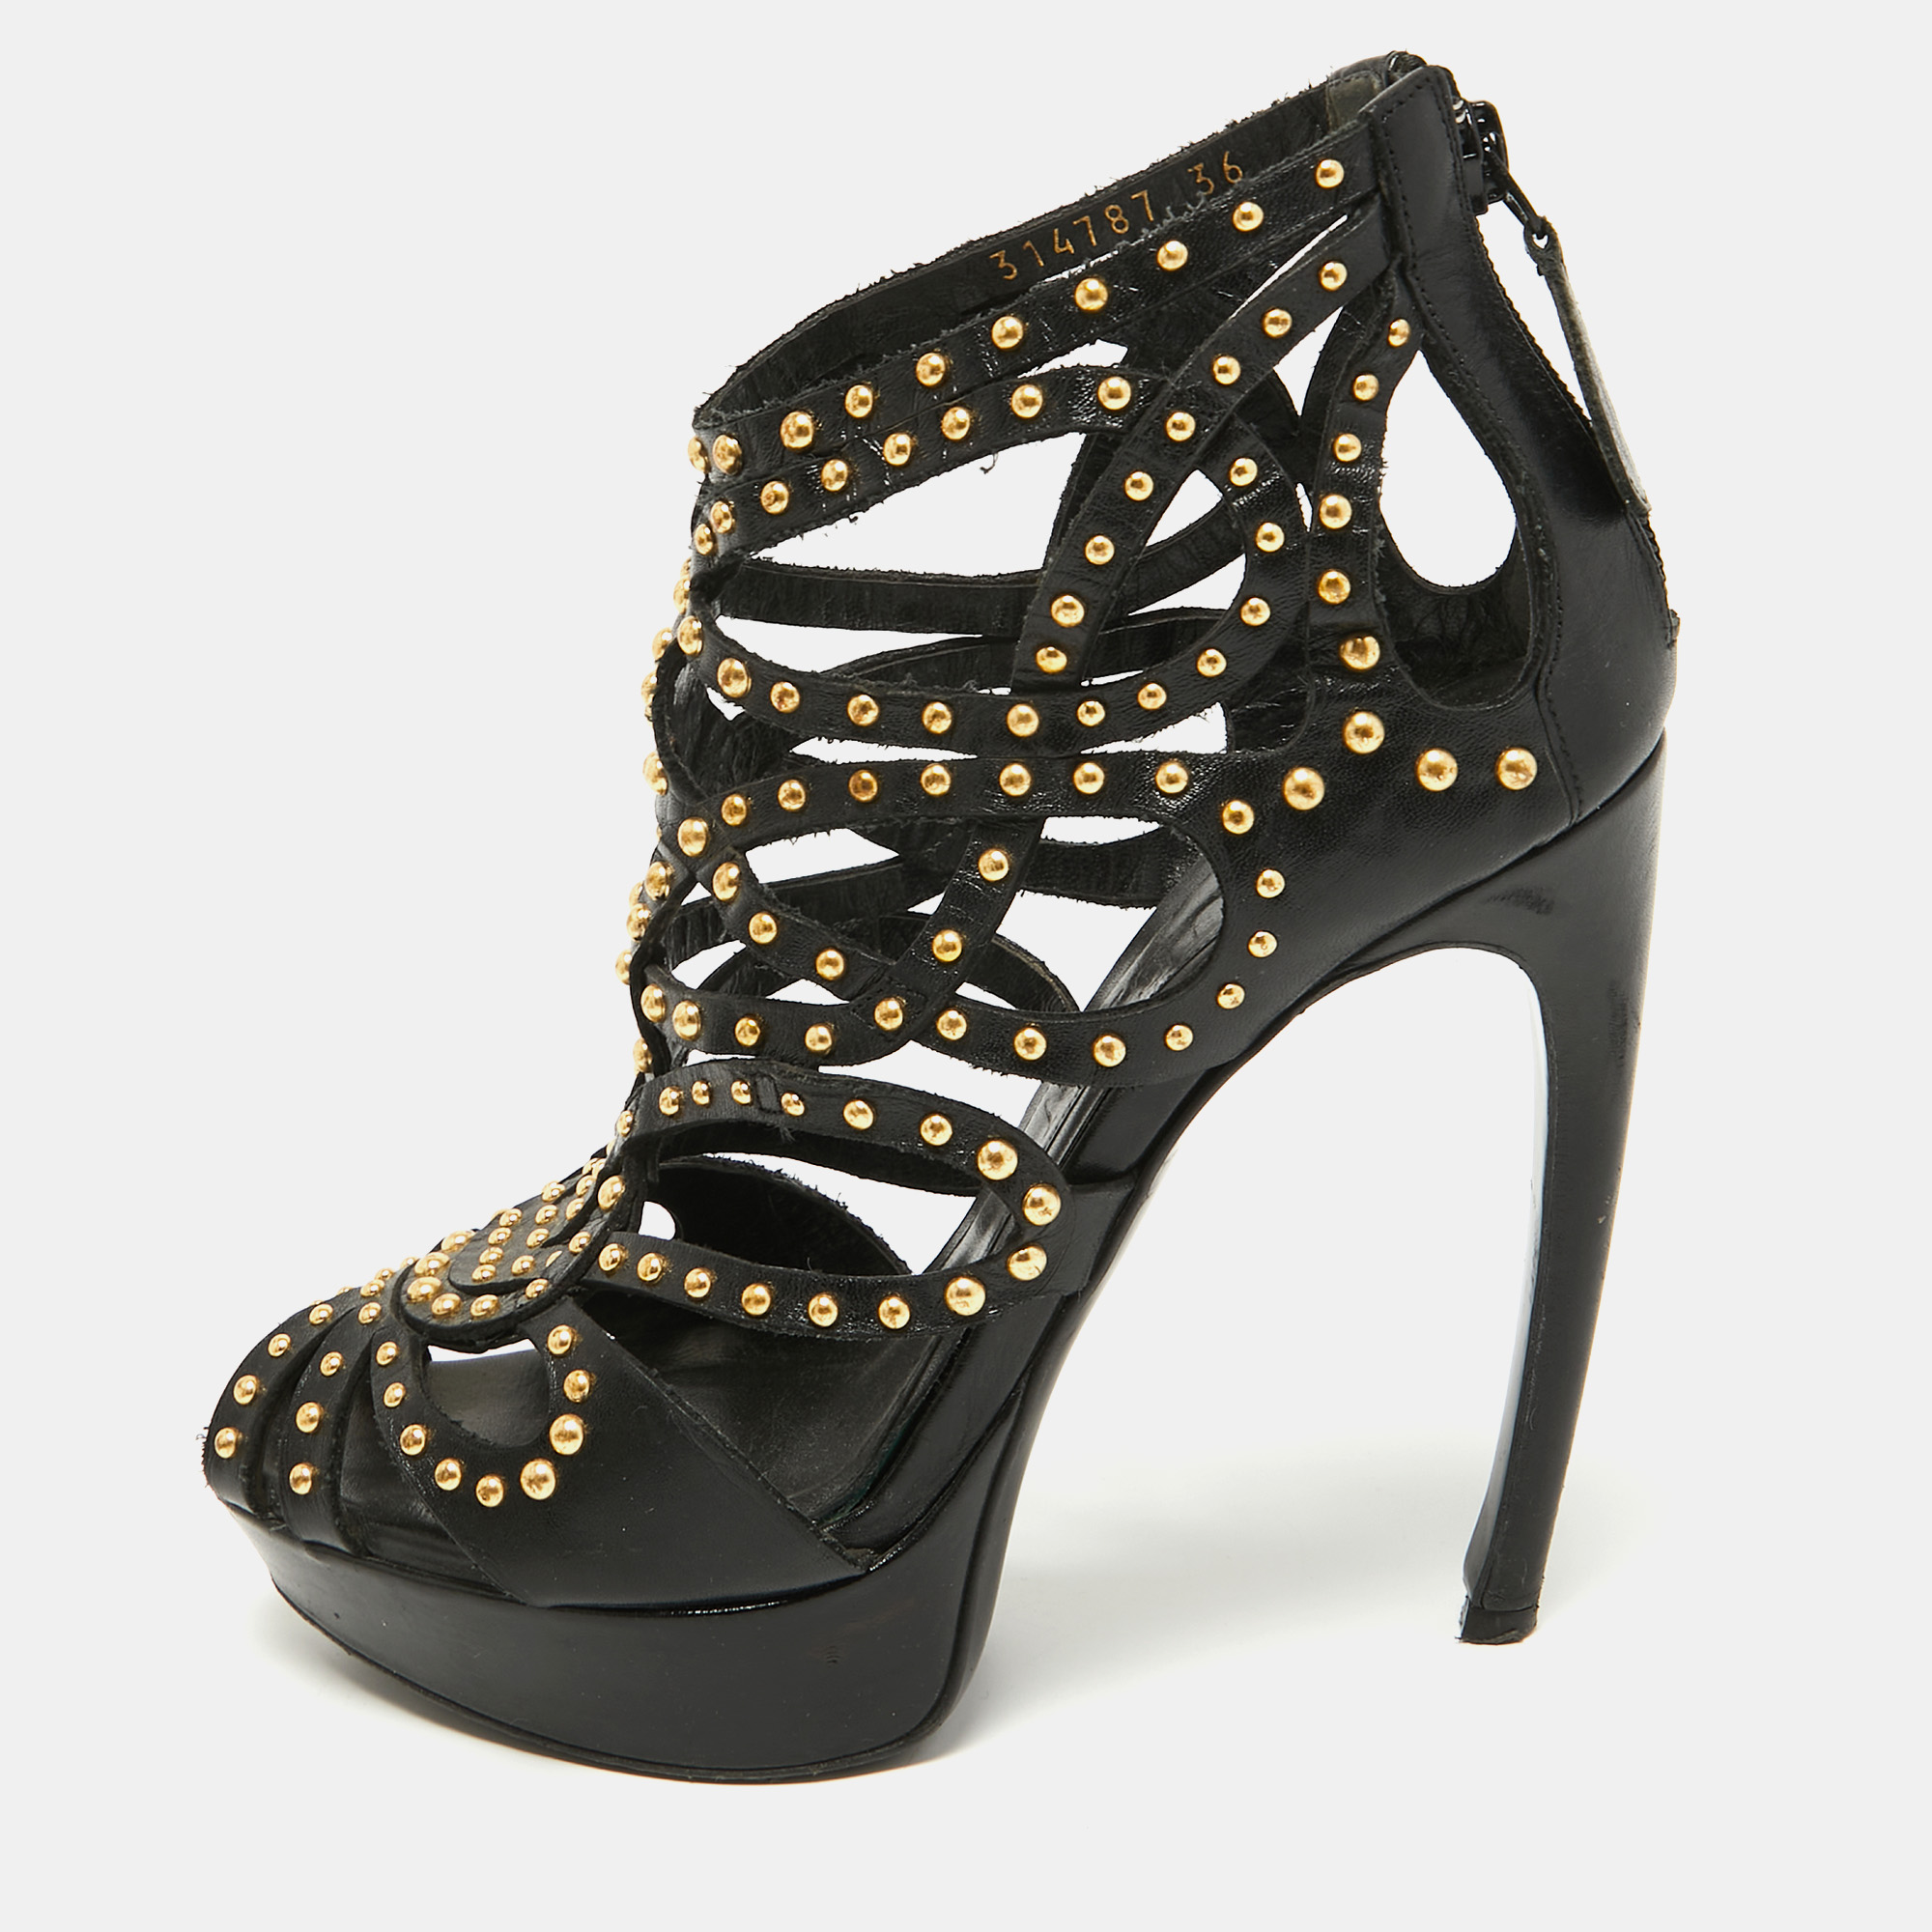 Alexander McQueen Black Leather Studded Caged Platform Booties Size 36